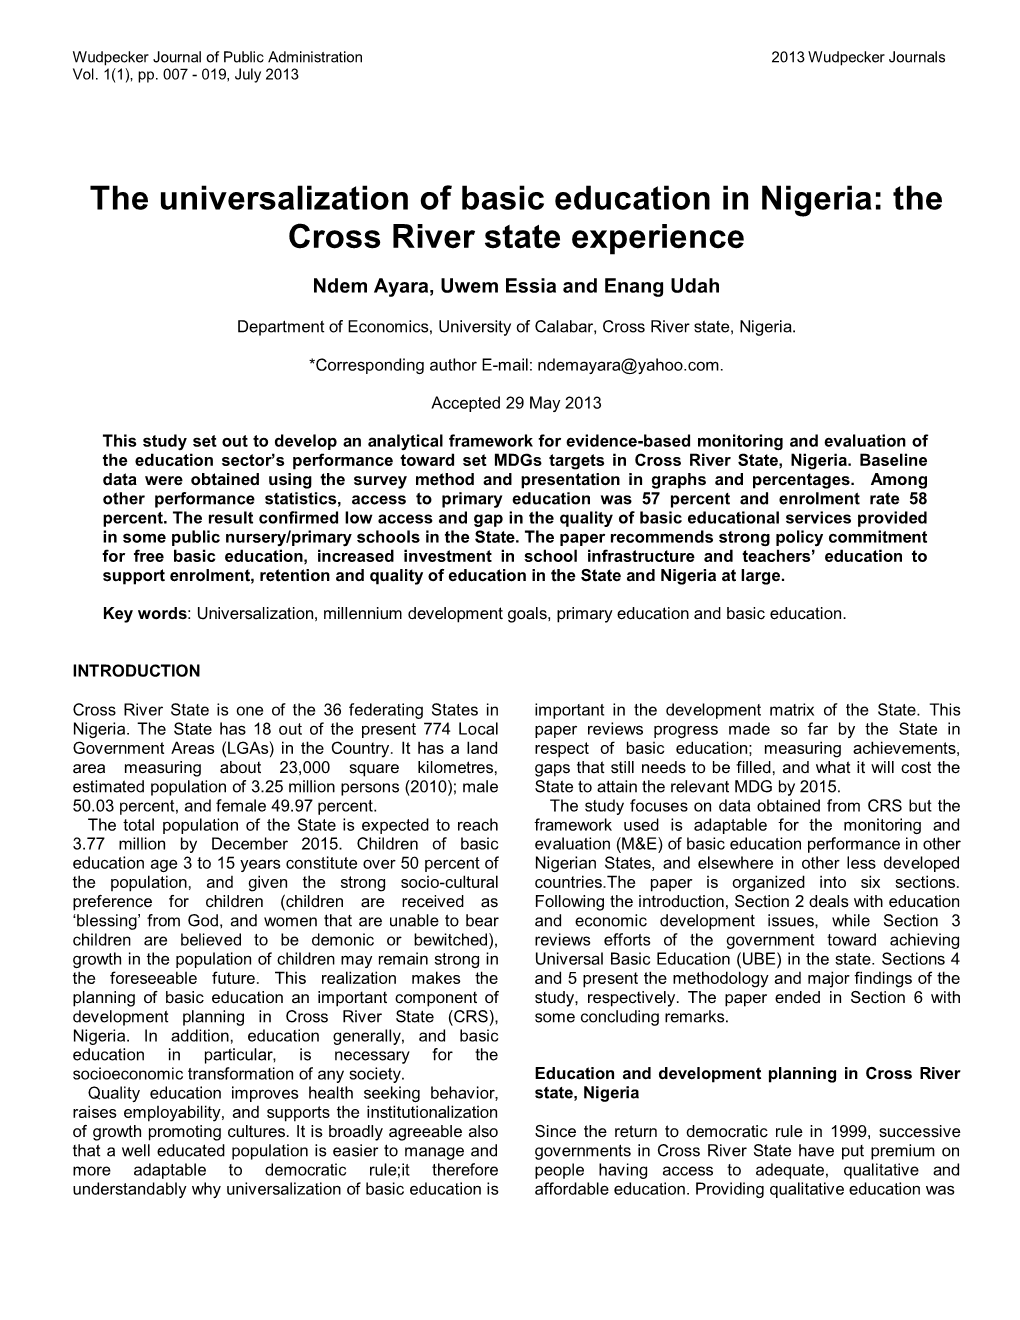 The Universalization of Basic Education in Nigeria: the Cross River State Experience